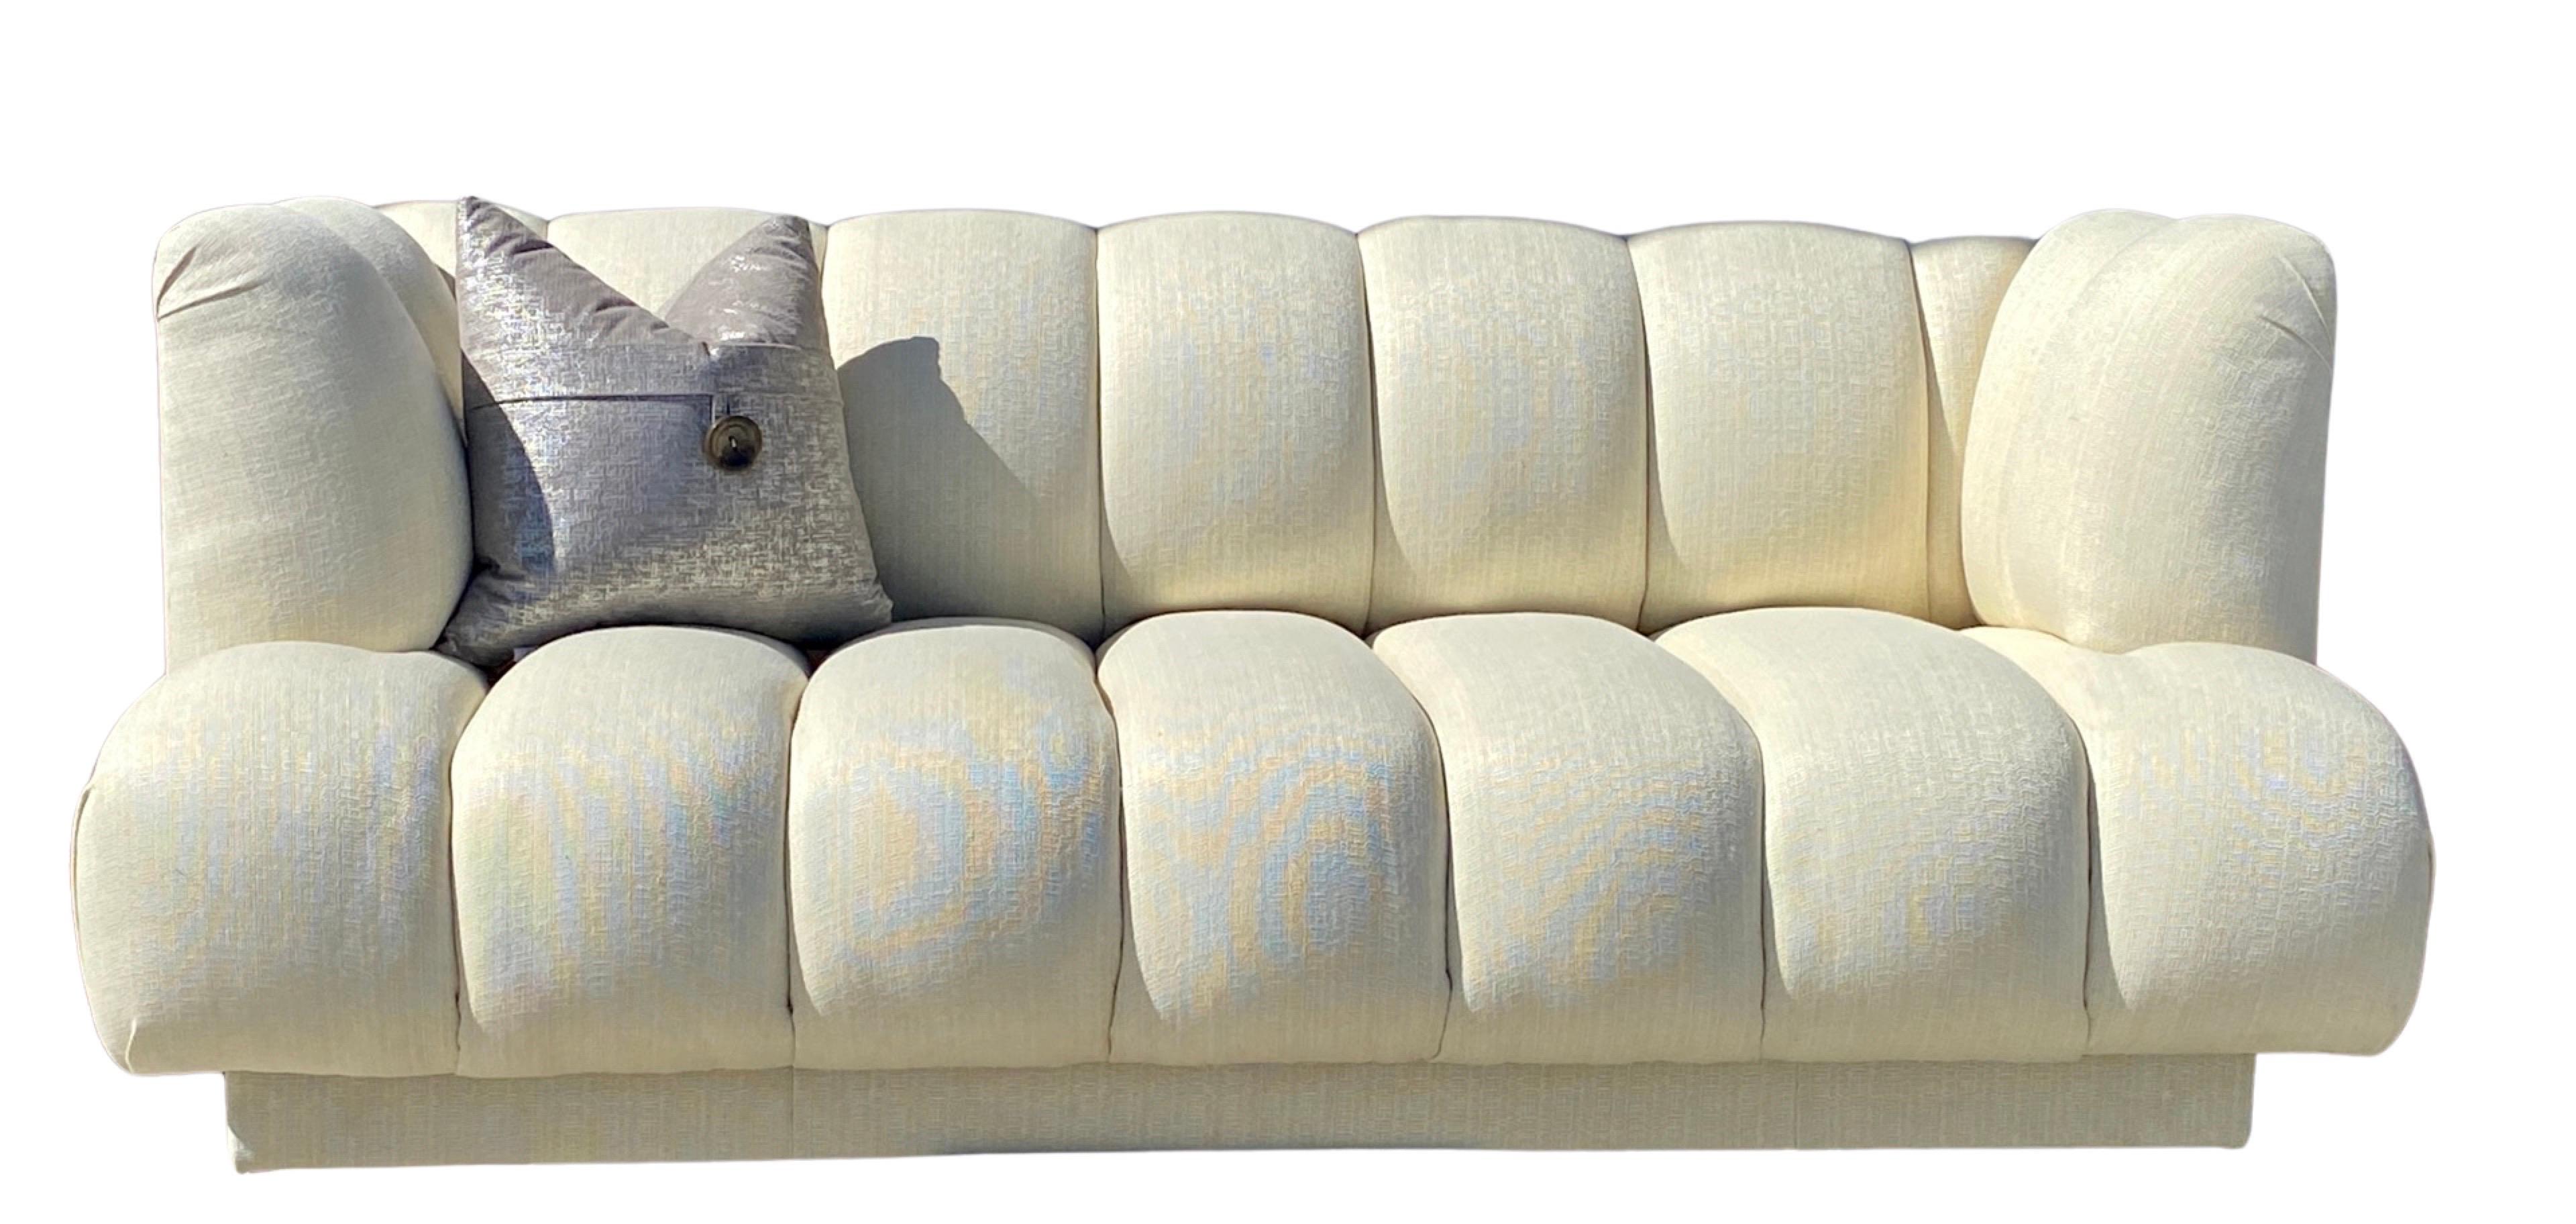 Steve Chase Iconic Channel Sofa From Celebrity Estate in New Creme Upholstery  For Sale 8